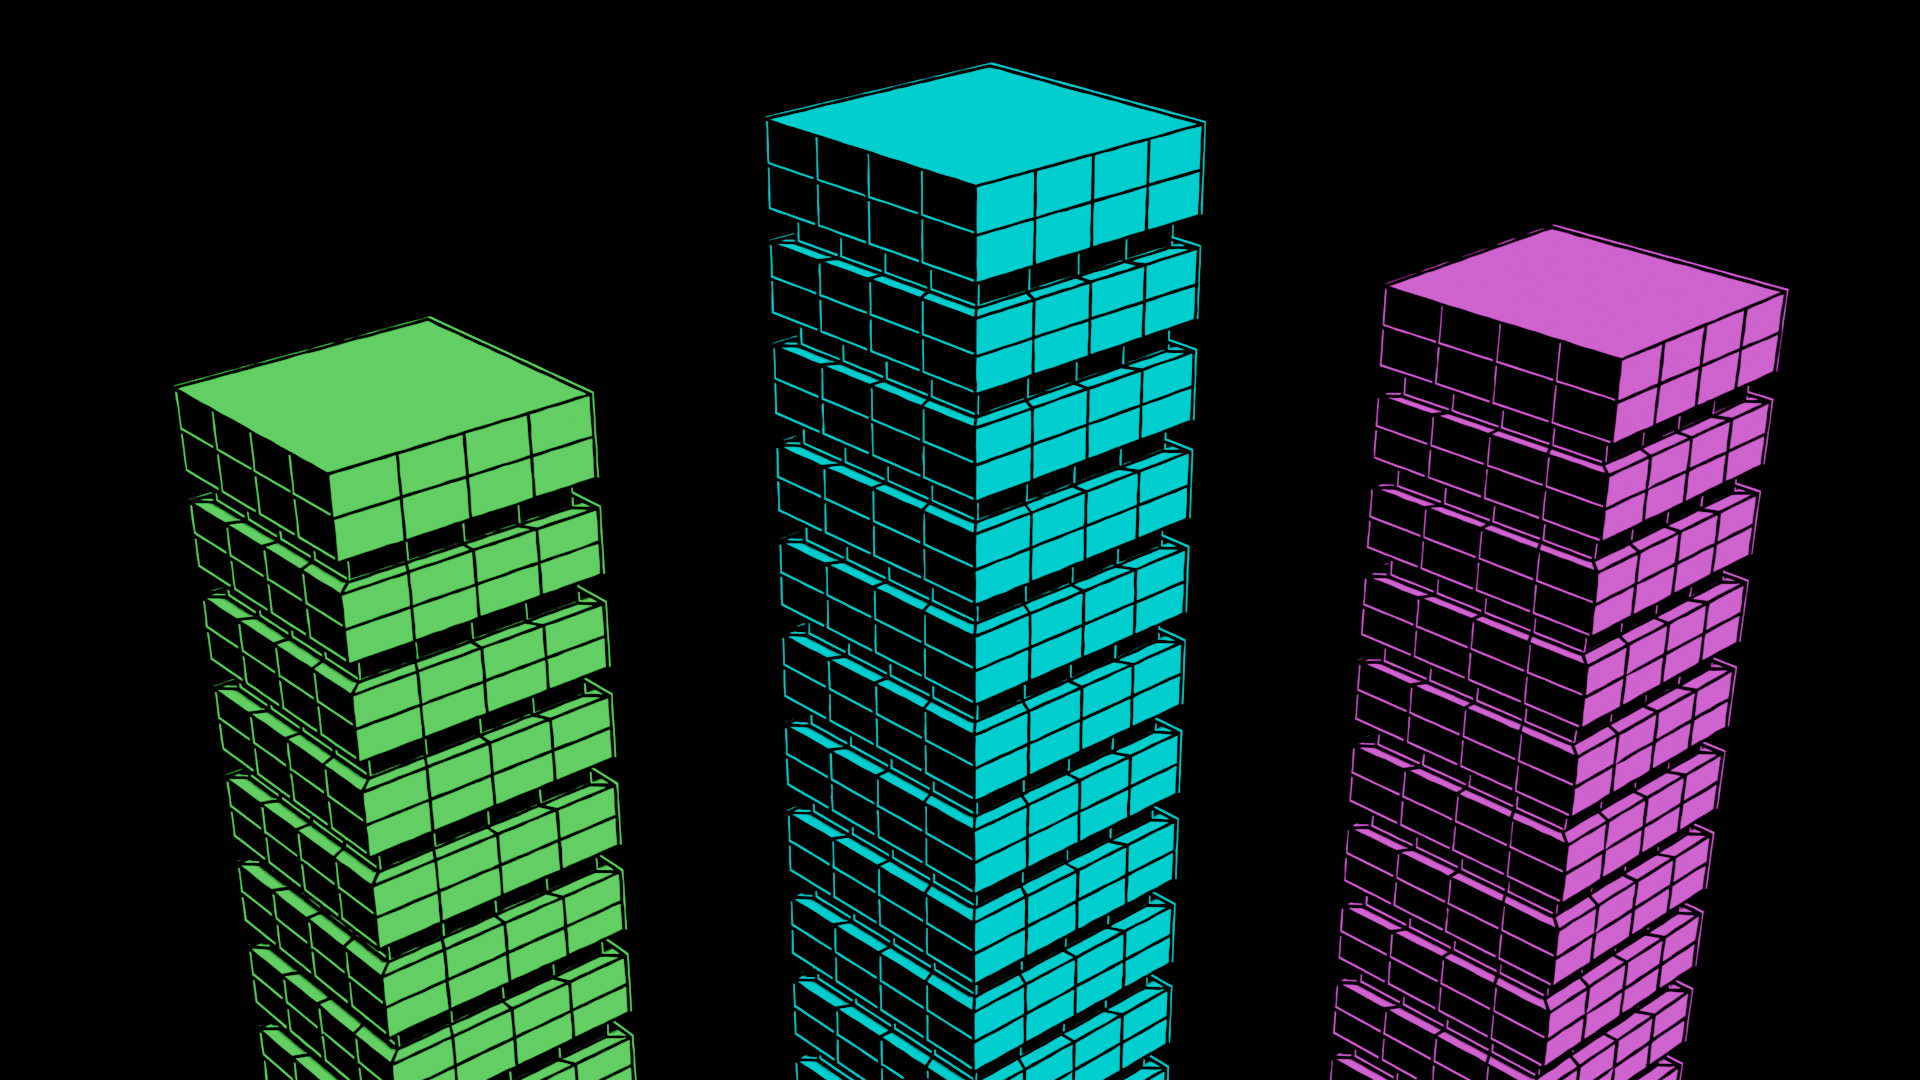 A stylized neon and black 3D render of buildings